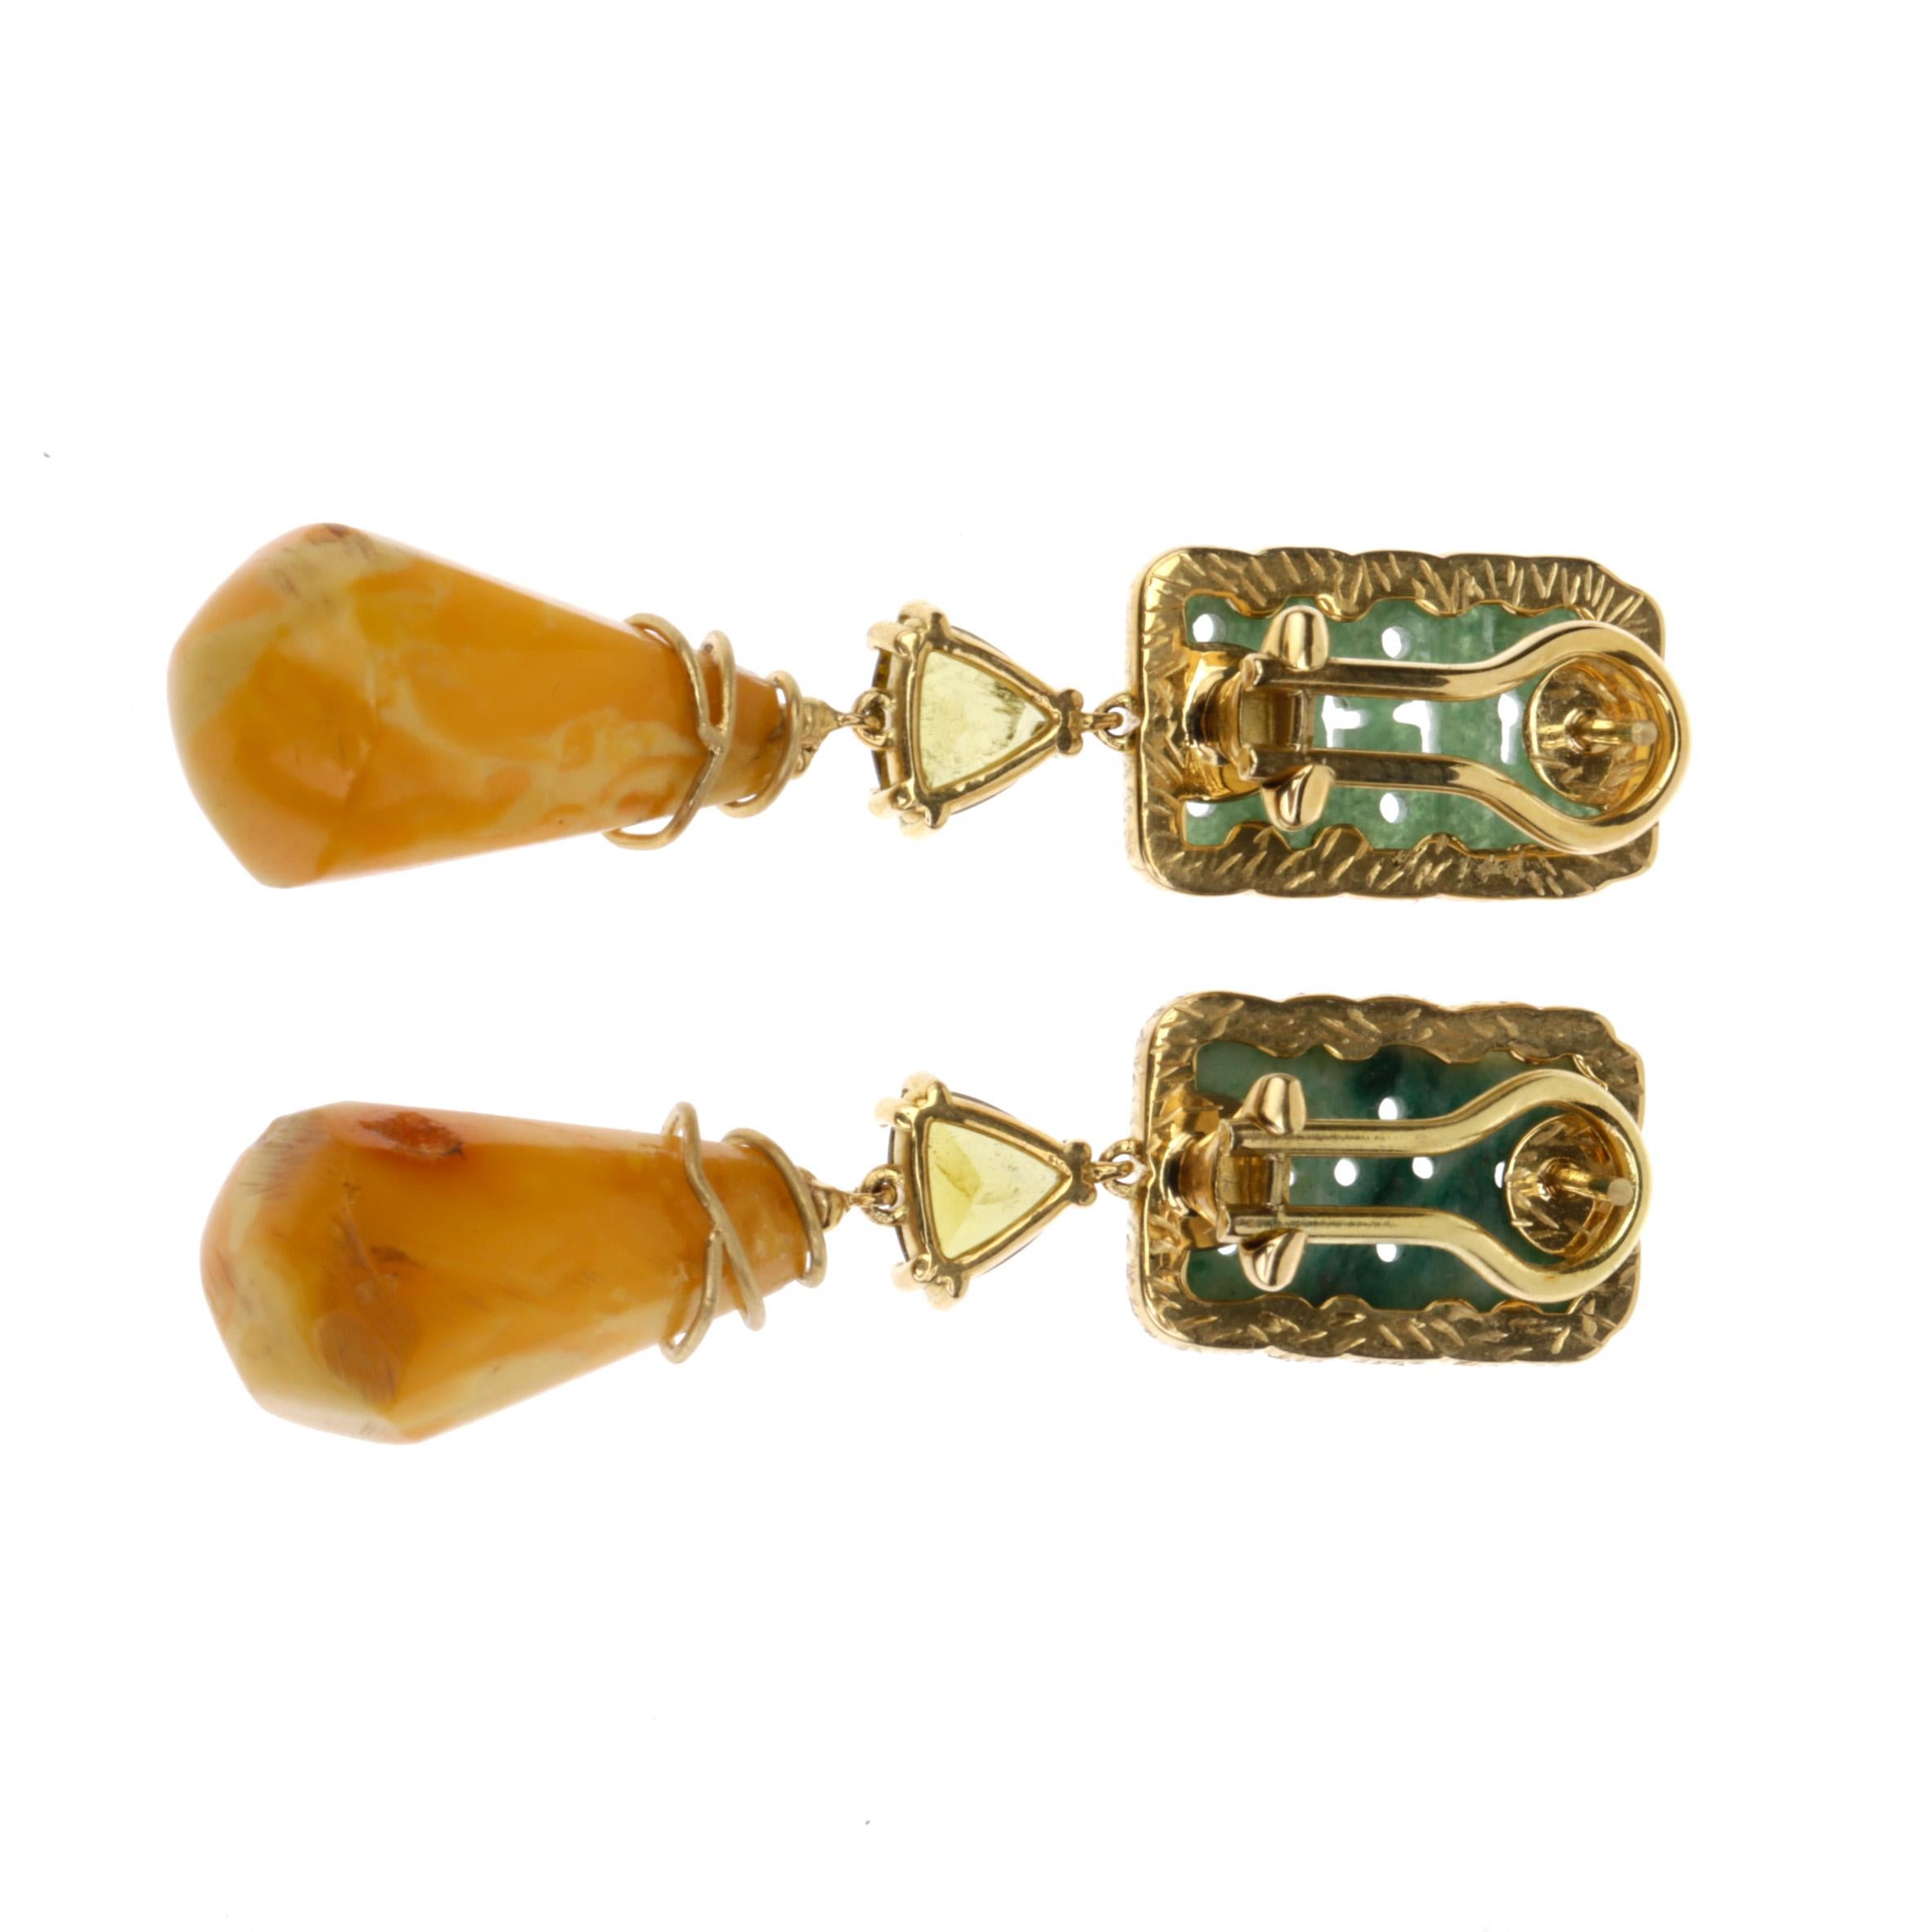 Baltic amber,  antique  cinese carved Jade, Yellow tourmaline  18 k Gold gr.27 earrings.
All Giulia Colussi jewelry is new and has never been previously owned or worn. Each item will arrive at your door beautifully gift wrapped in our boxes, put